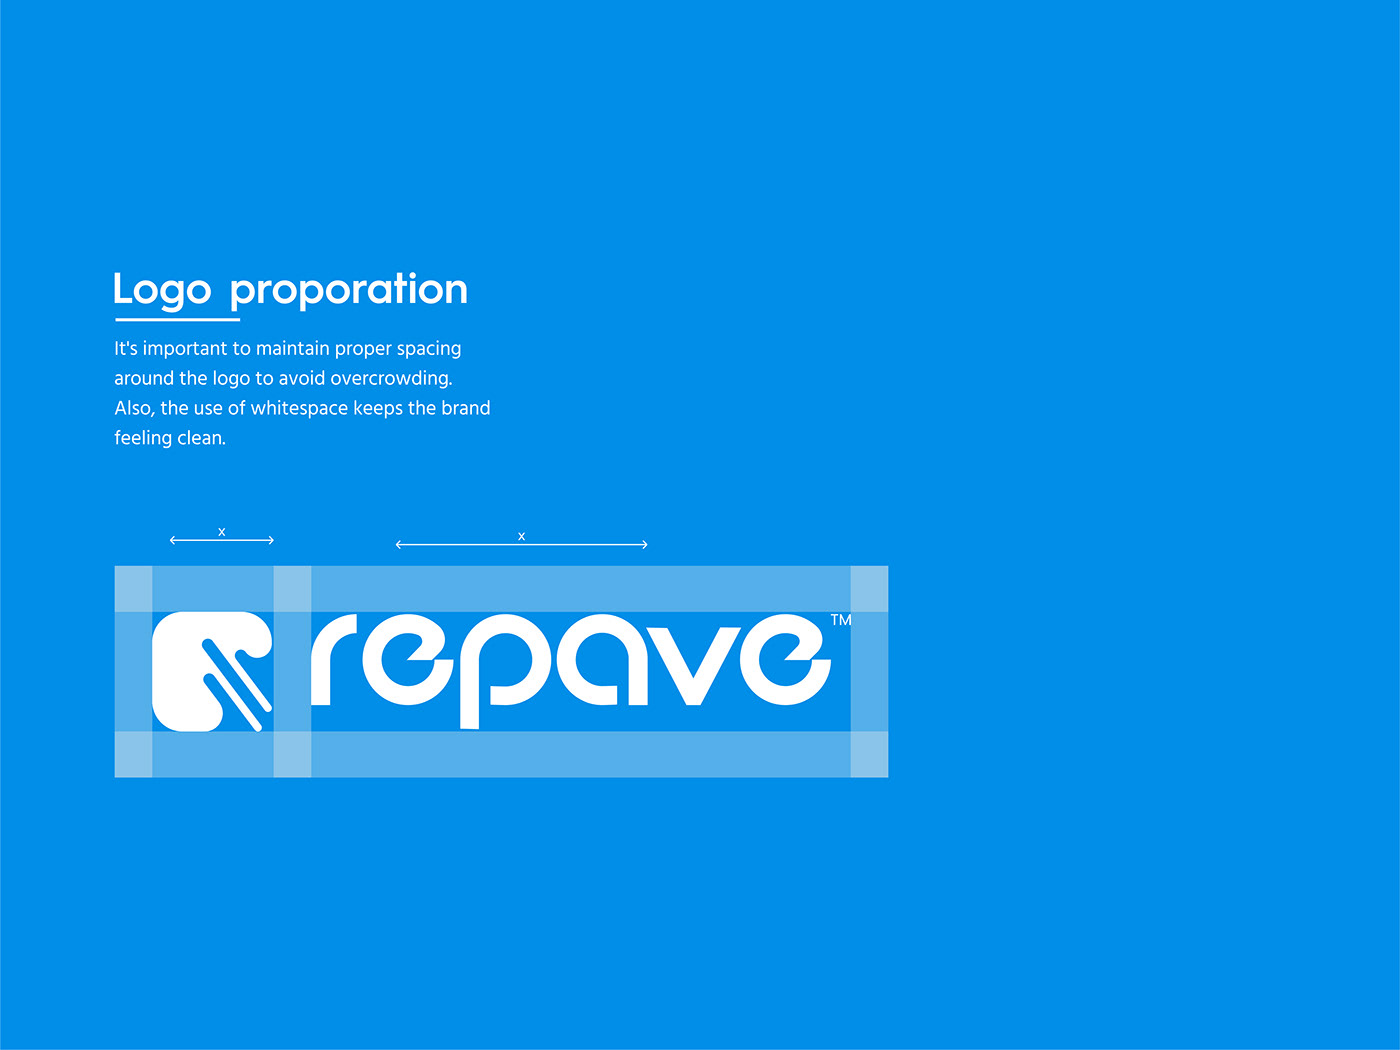 Hare is a brand identity for repave™